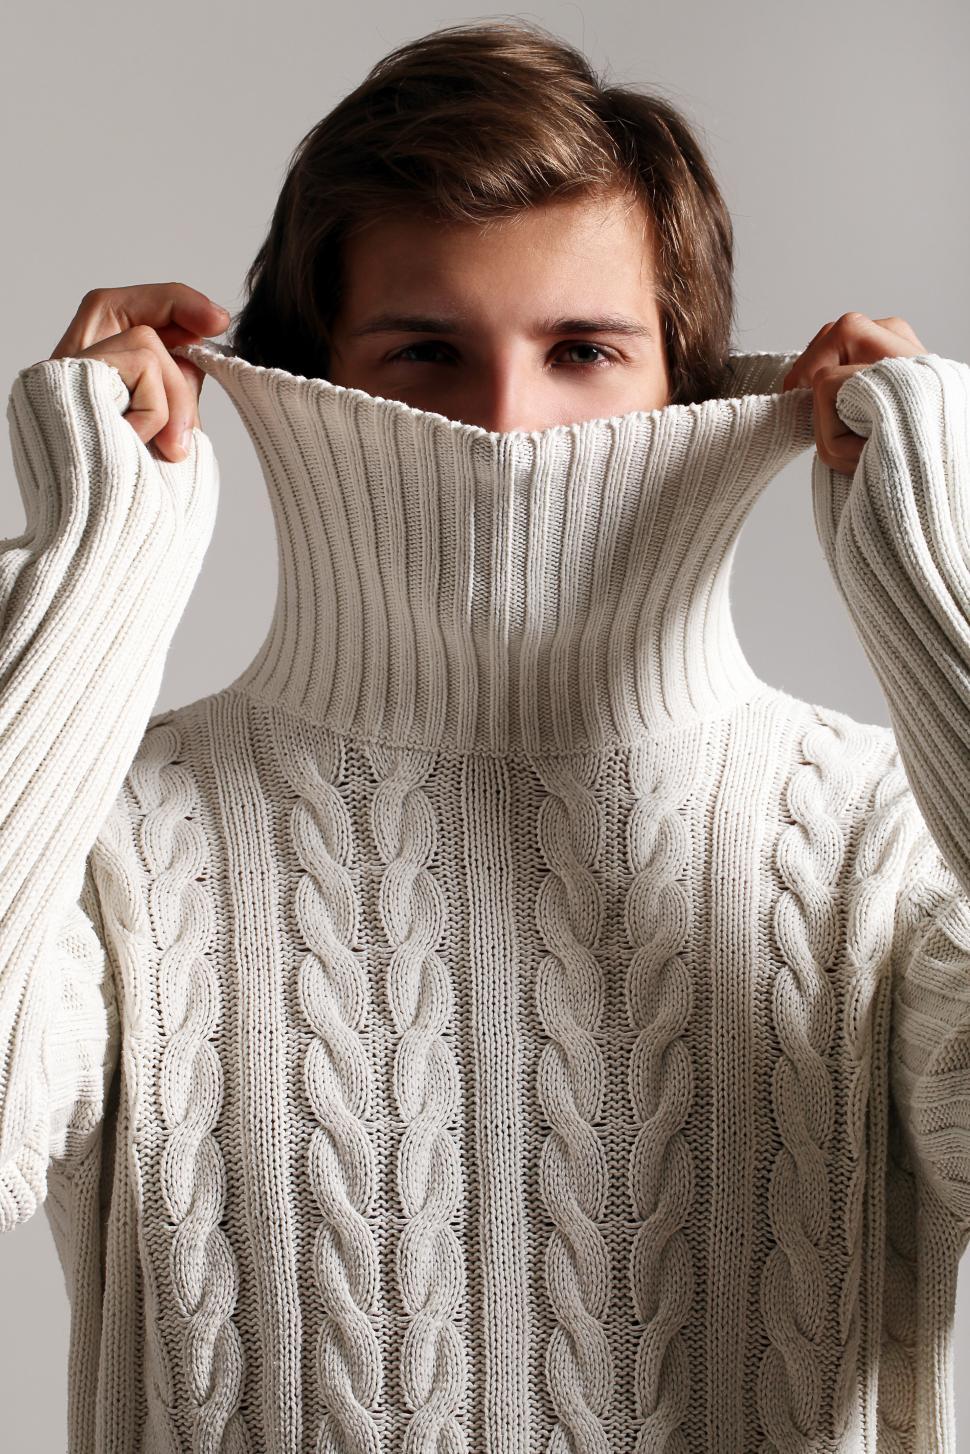 Free Image of Man peeks out from large white sweater 